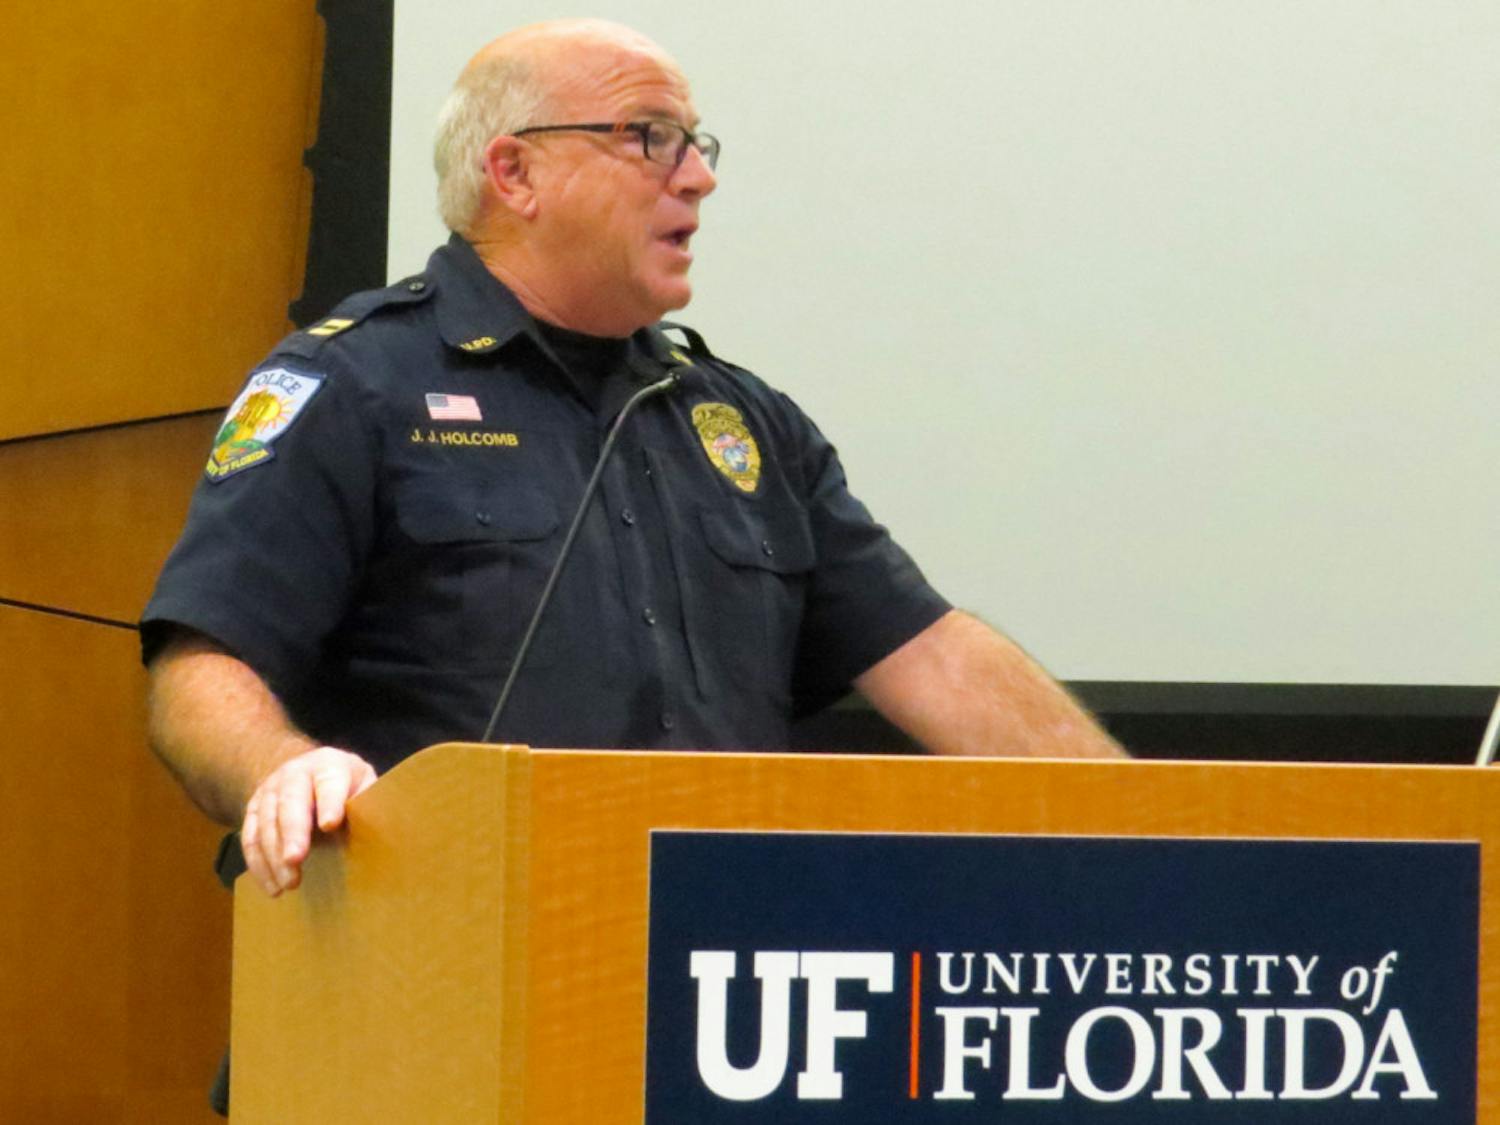 University Police Capt. Jeff Holcomb addresses Student Senate on Tuesday night about safety during finals week. He said crime usually increases around the libraries during the end of the semester, when more students are studying and leaving their belongings unattended.